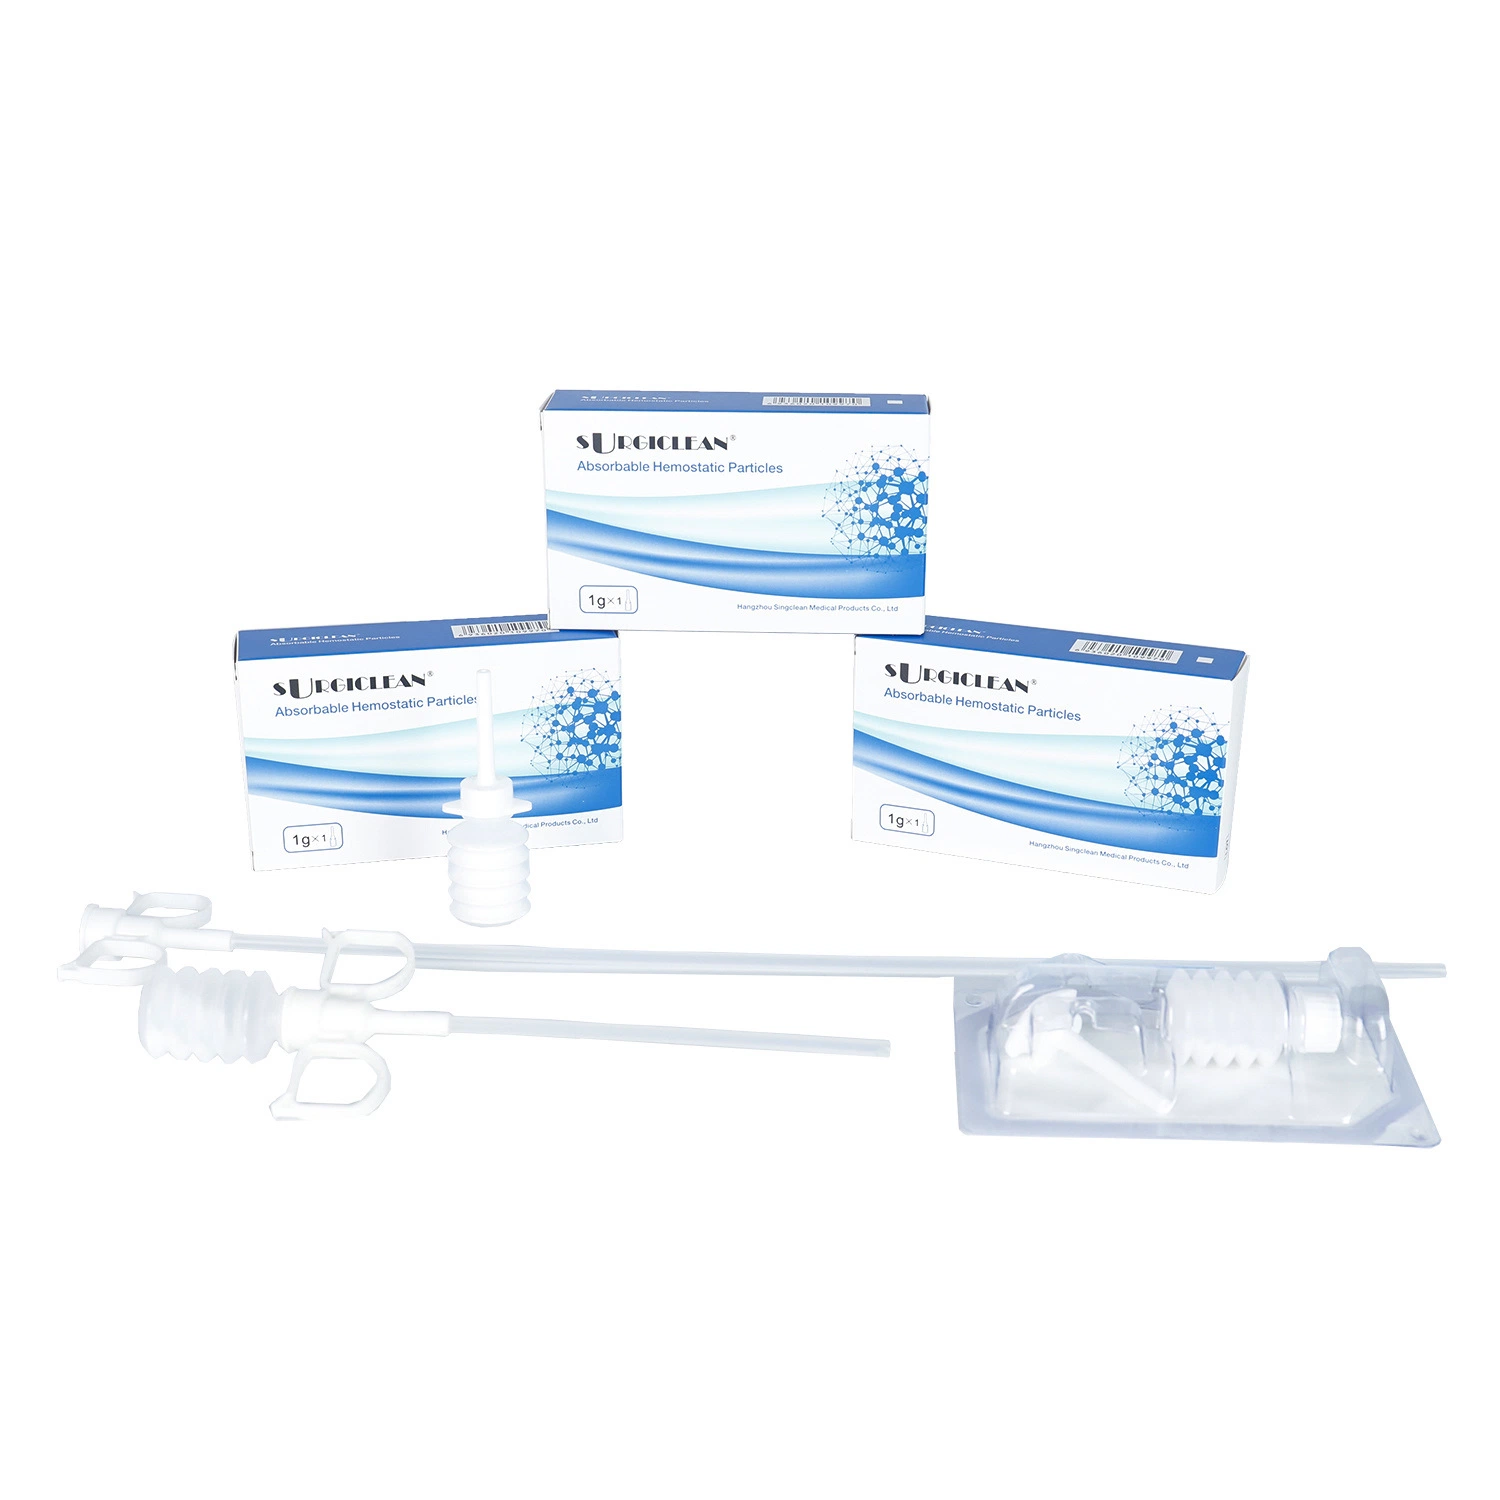 Emergency First Aid Medical Products Singclean Hemostatic Mph Powder for Endoscopic and Laparoscopic Surgery